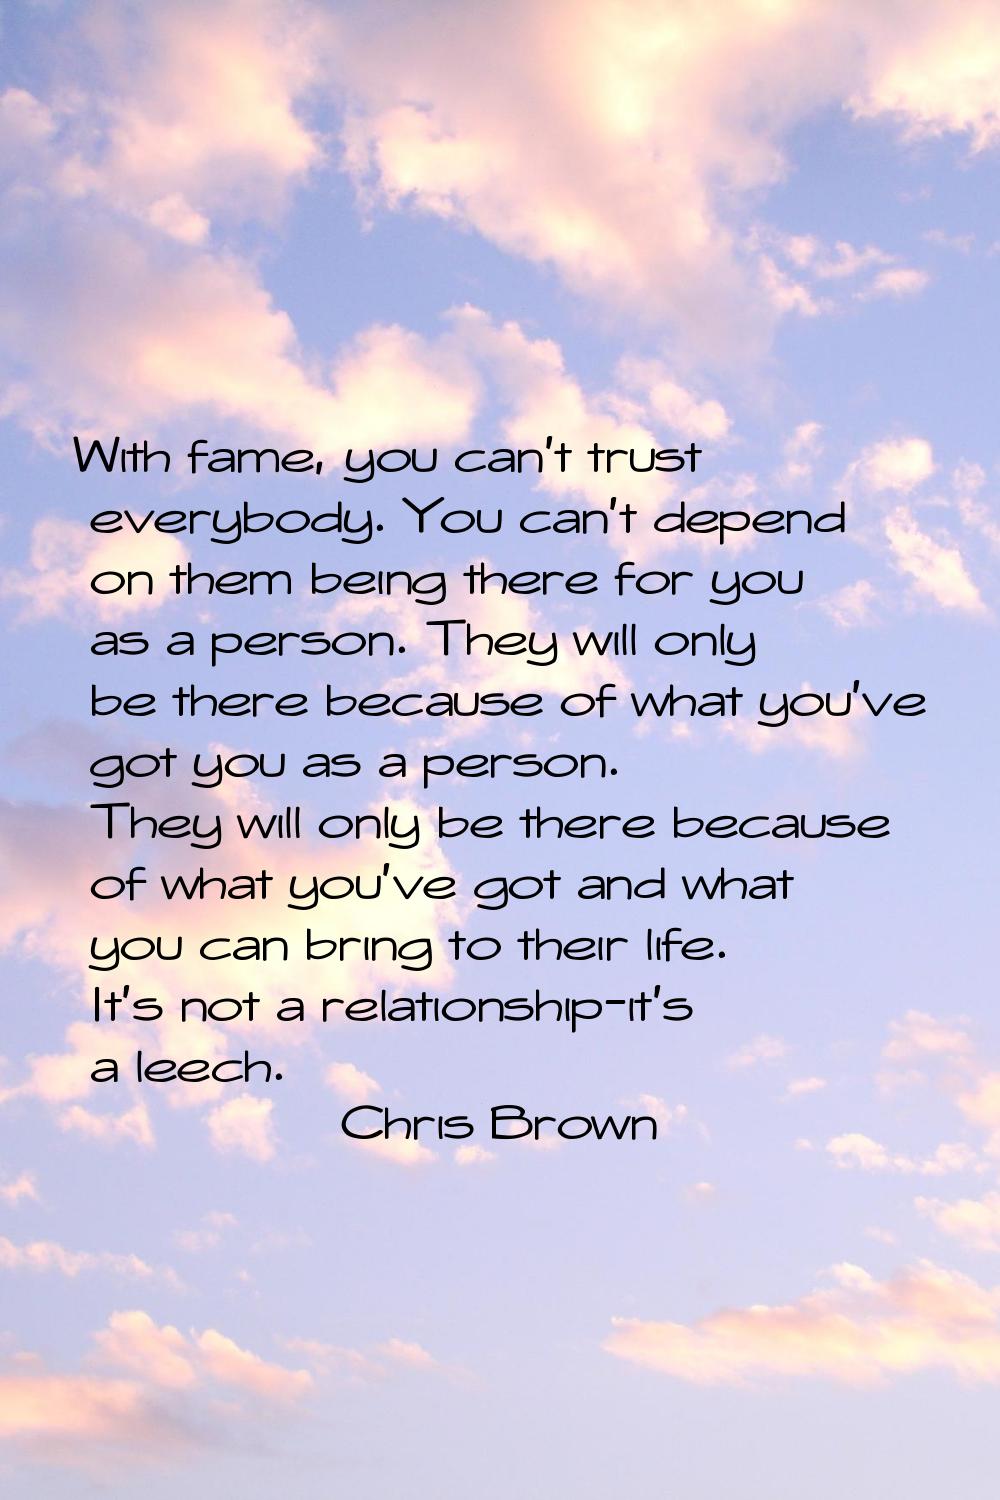 With fame, you can't trust everybody. You can't depend on them being there for you as a person. The